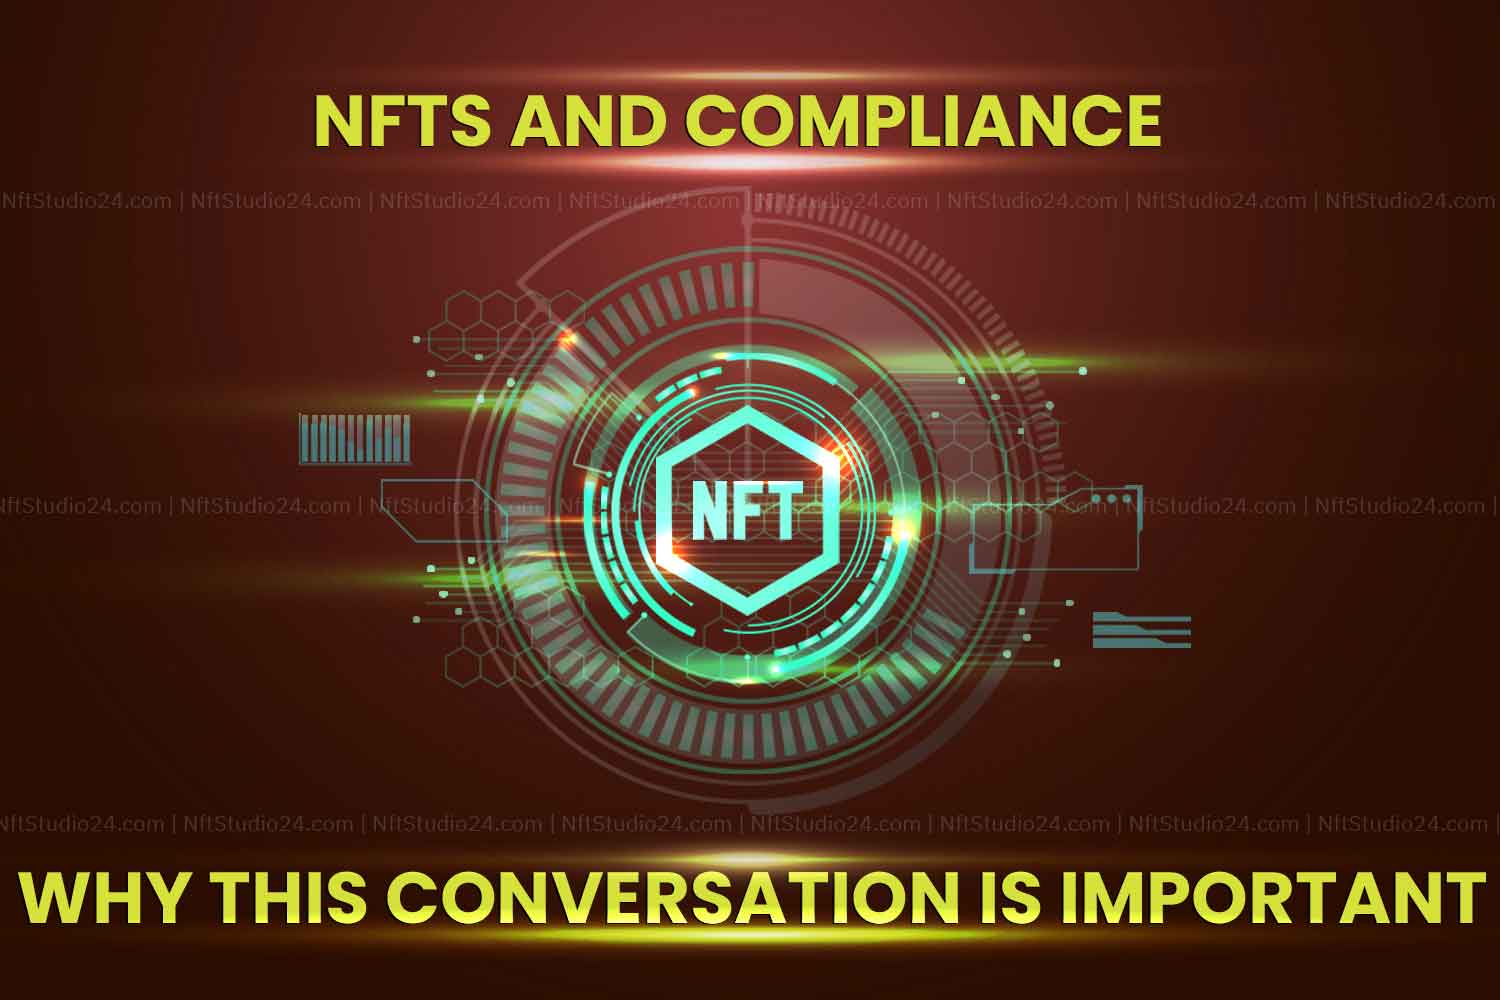 NFTs and compliance